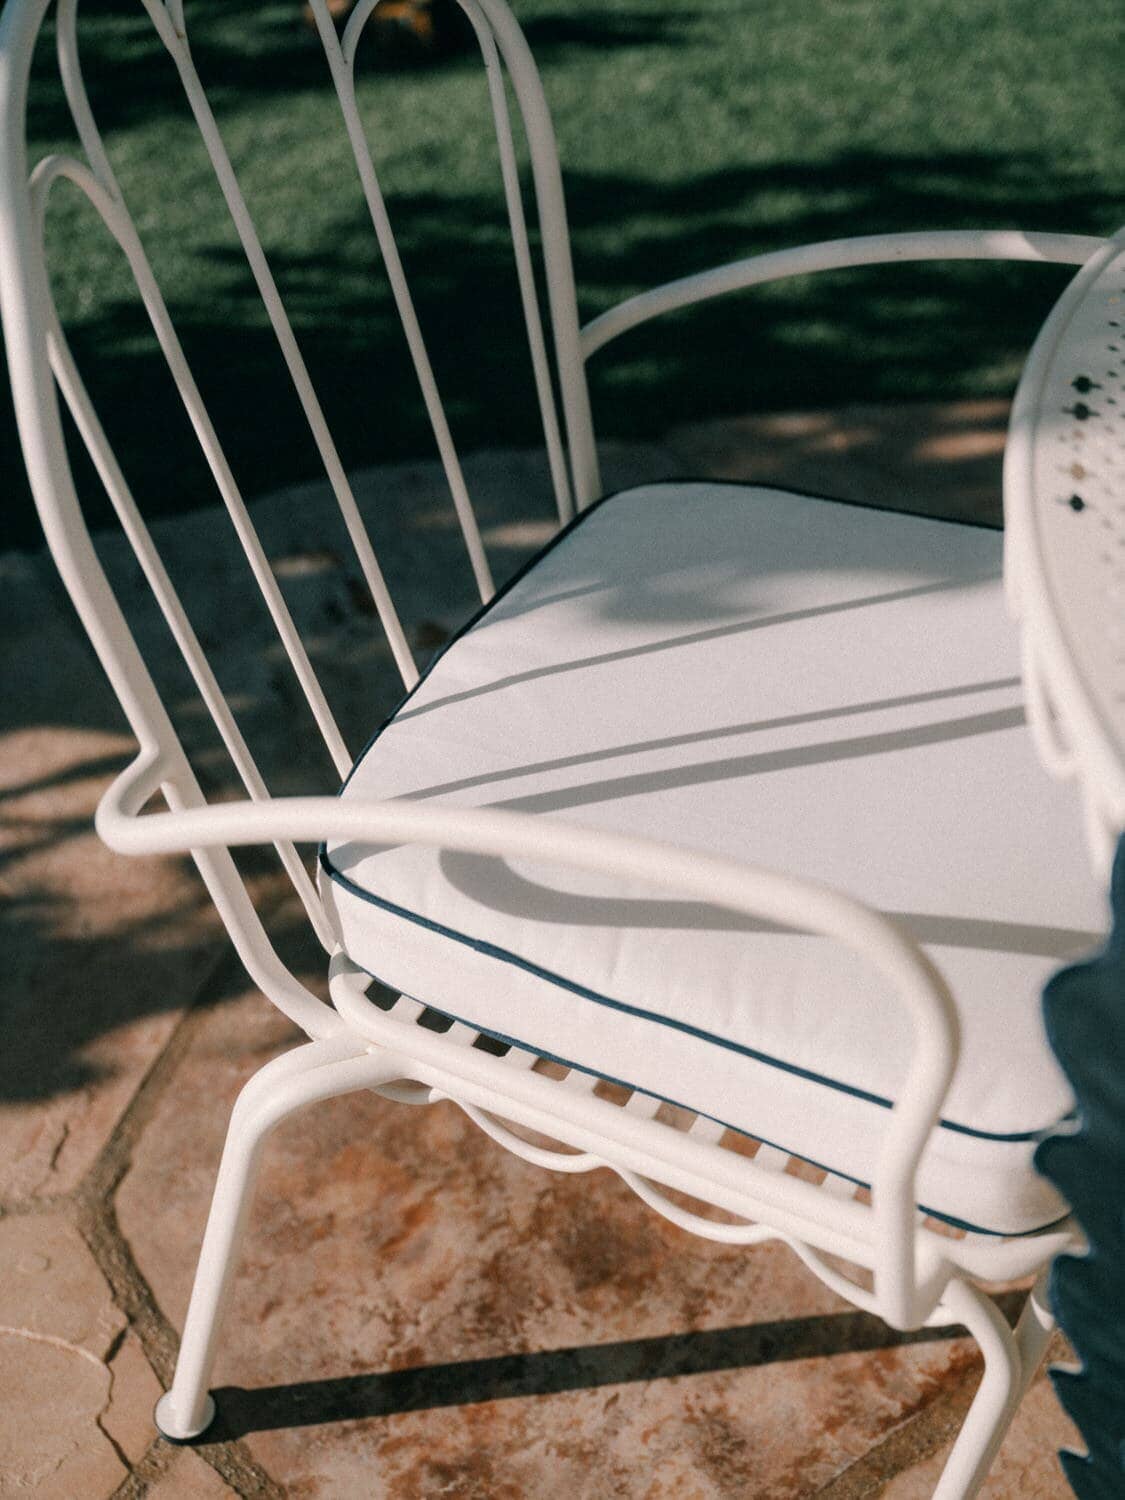 Dining chair at an outdoor dining setting